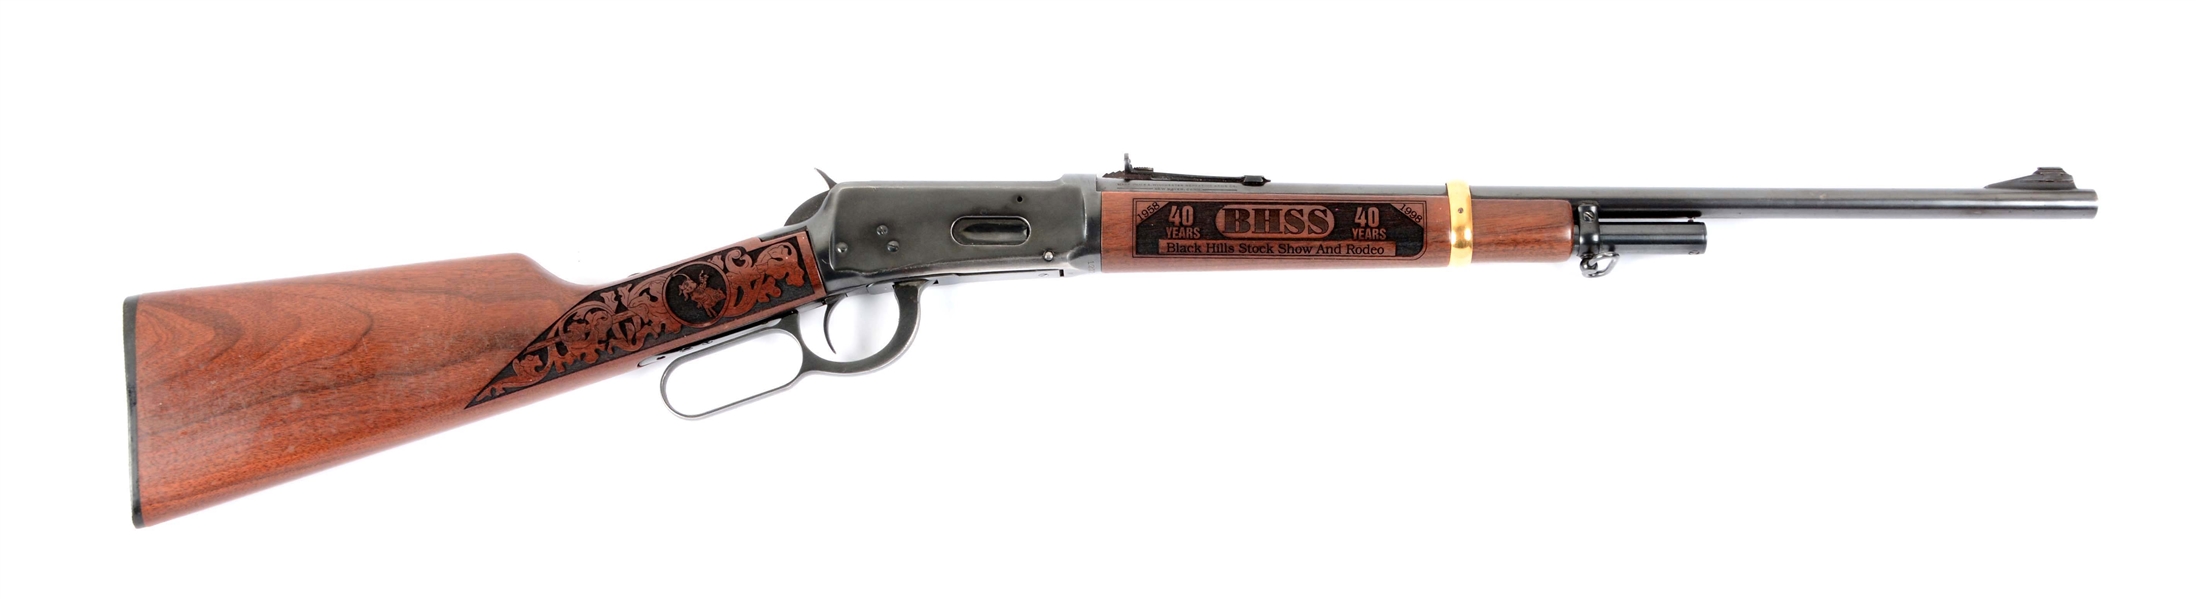 (M) WINCHESTER MODEL 1894 BHSS 40TH ANNIVERSARY LEVER ACTION RIFLE.